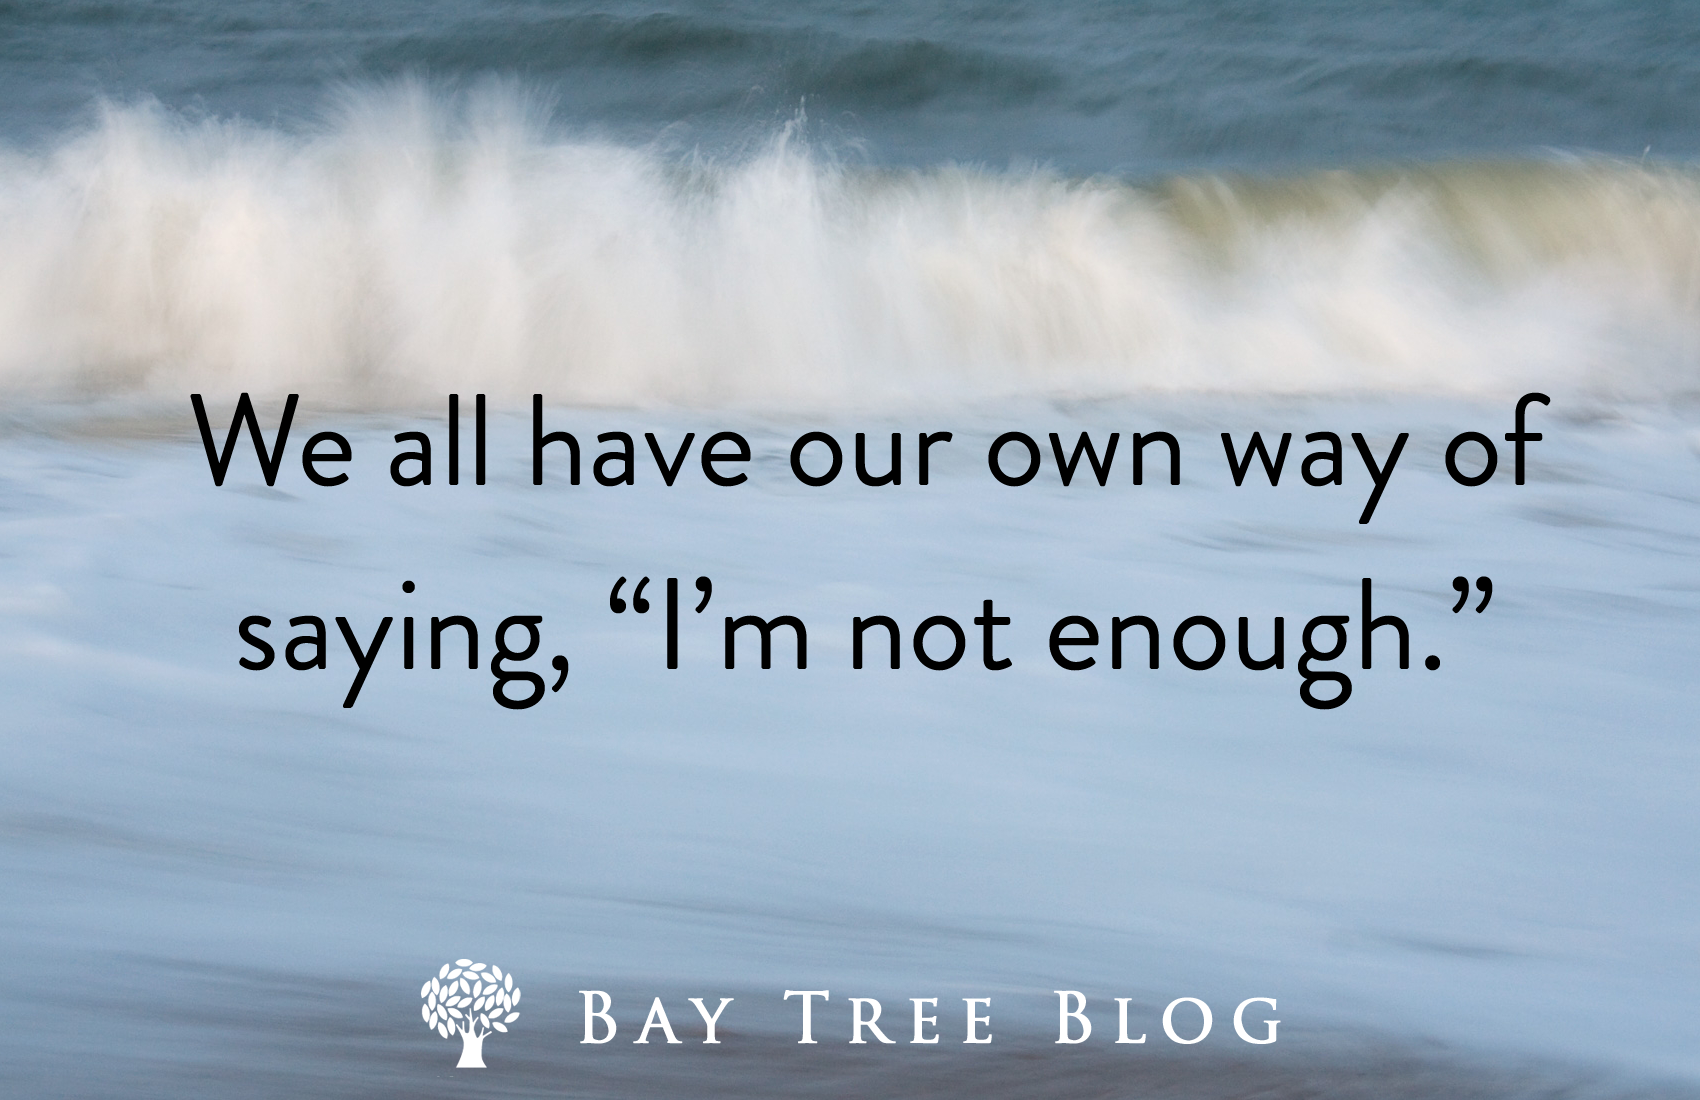 We all have our own way of saying, 'I’m not enough.' BayTreeBlog.com